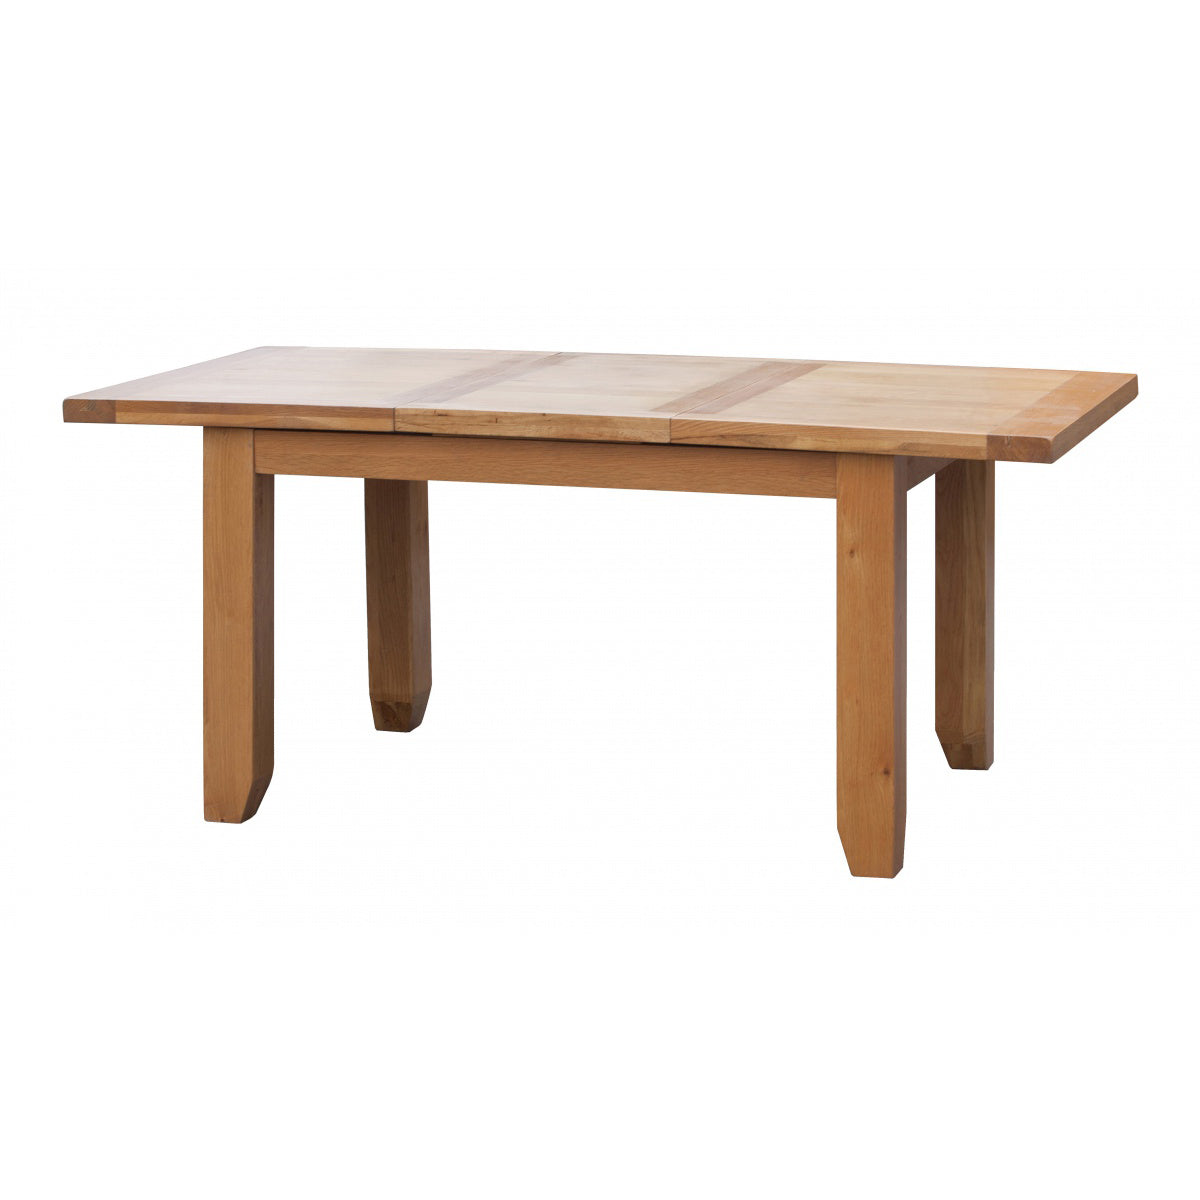 Acorn Solid Oak Extending Dining Table Small